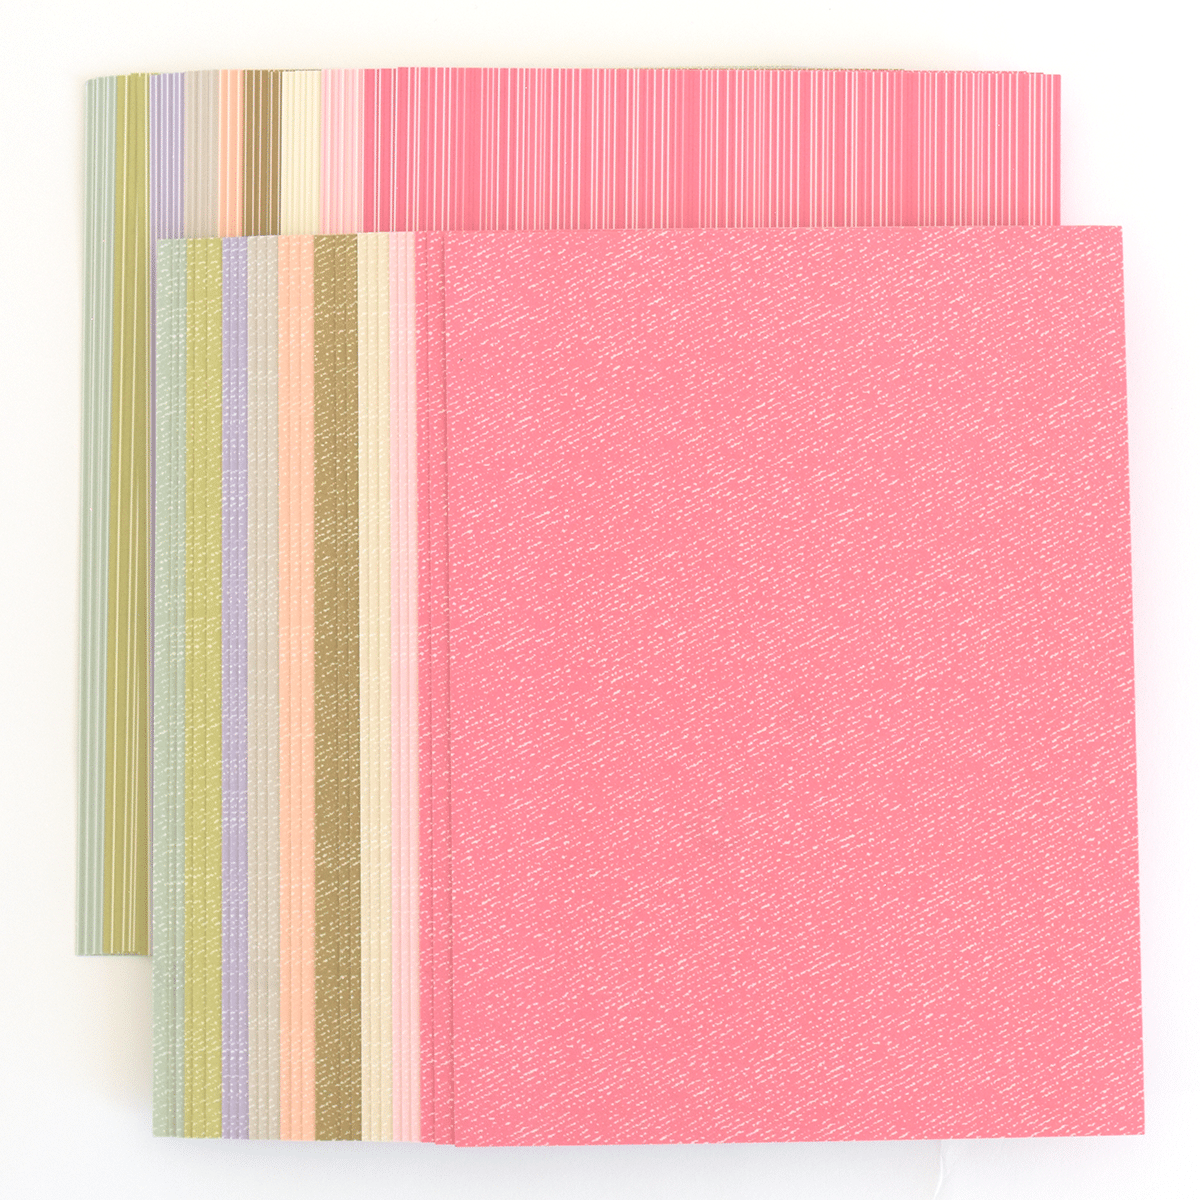 a set of three different colored papers on a white surface.